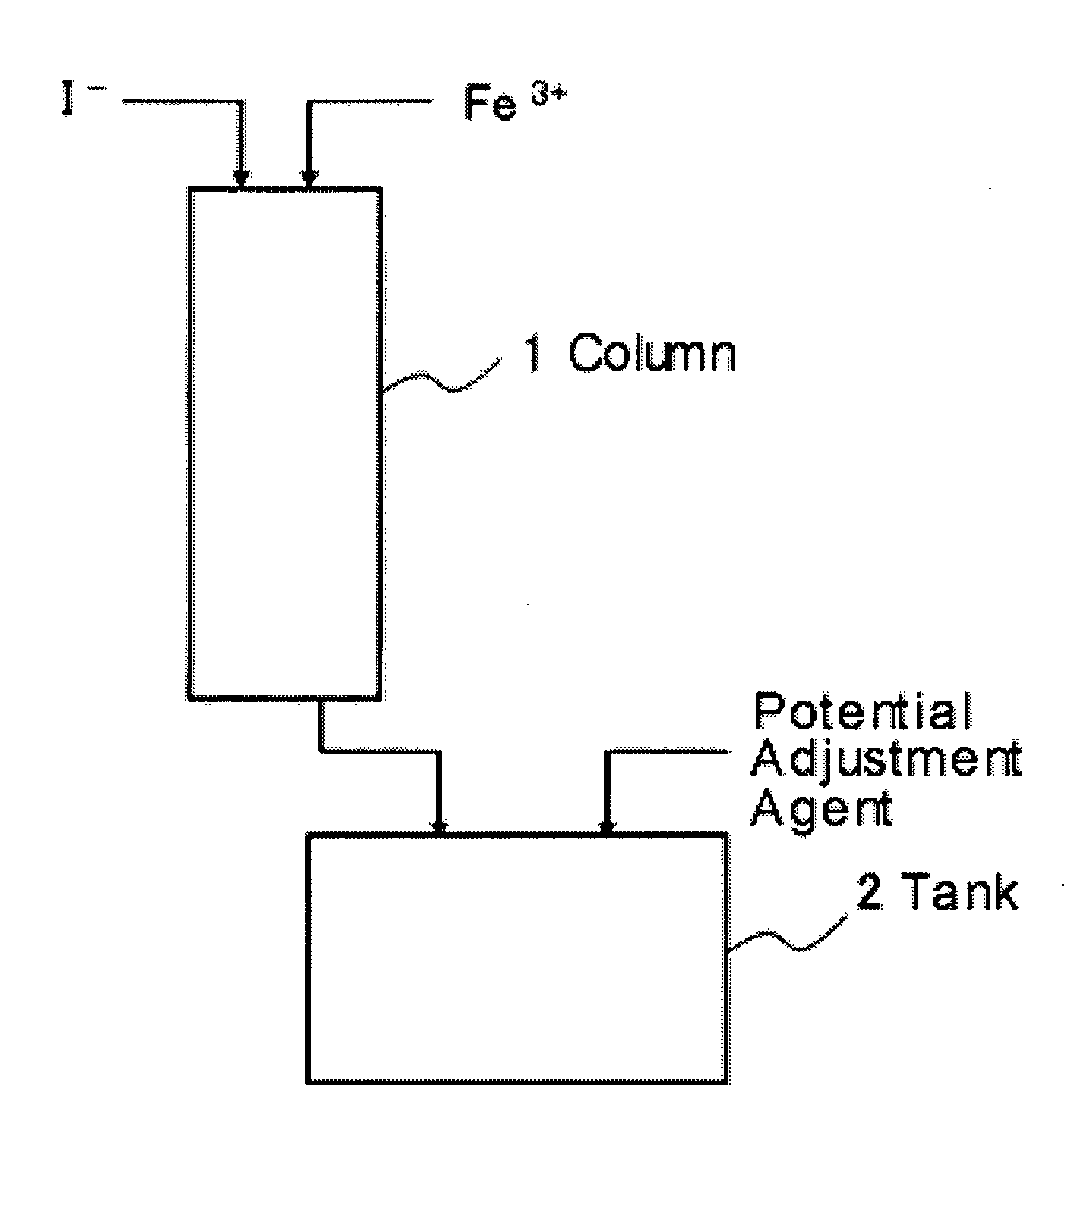 Method of leaching copper from copper sulfide ore and method of evaluating iodine loss content of column leaching test of the copper sulfide ore